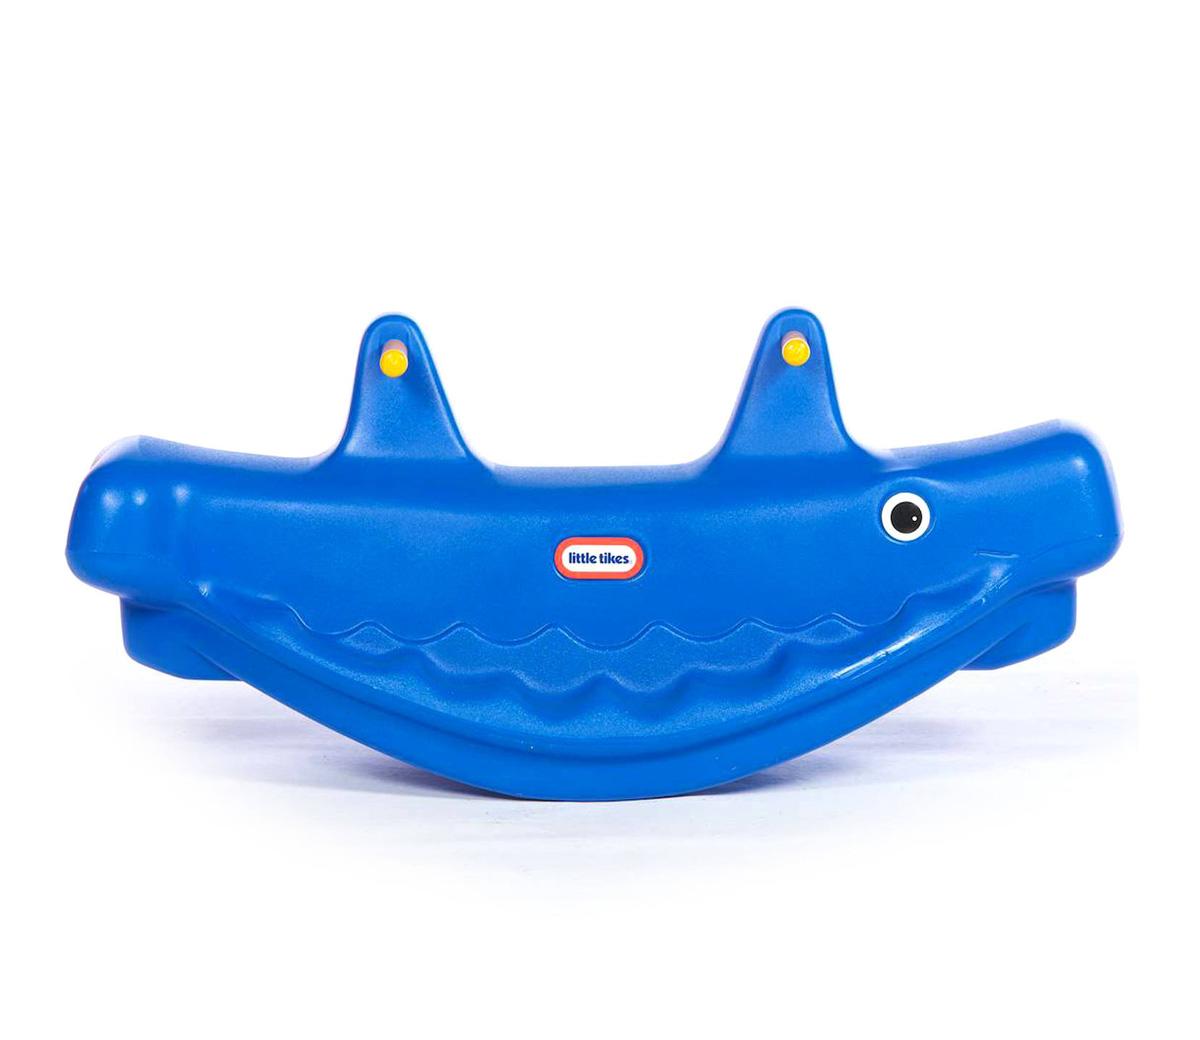 Little tikes whale teeter totter blue